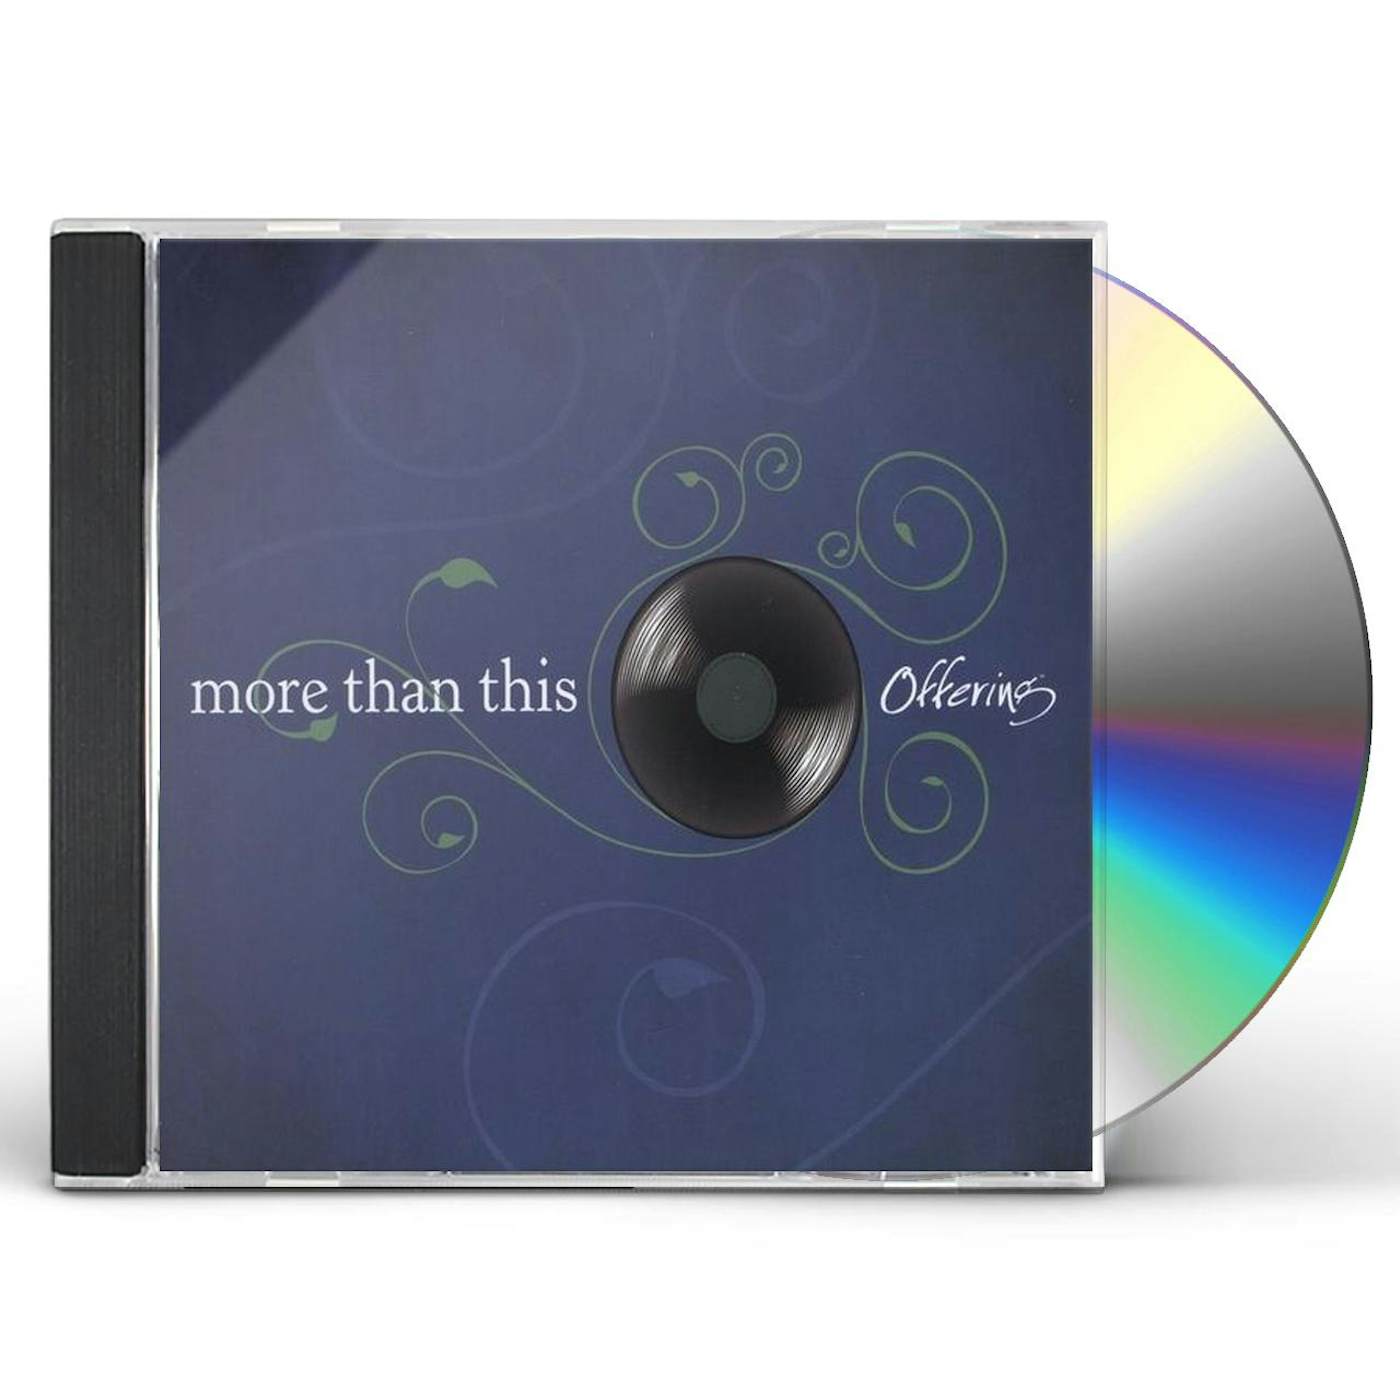 Offering MORE THAN THIS CD